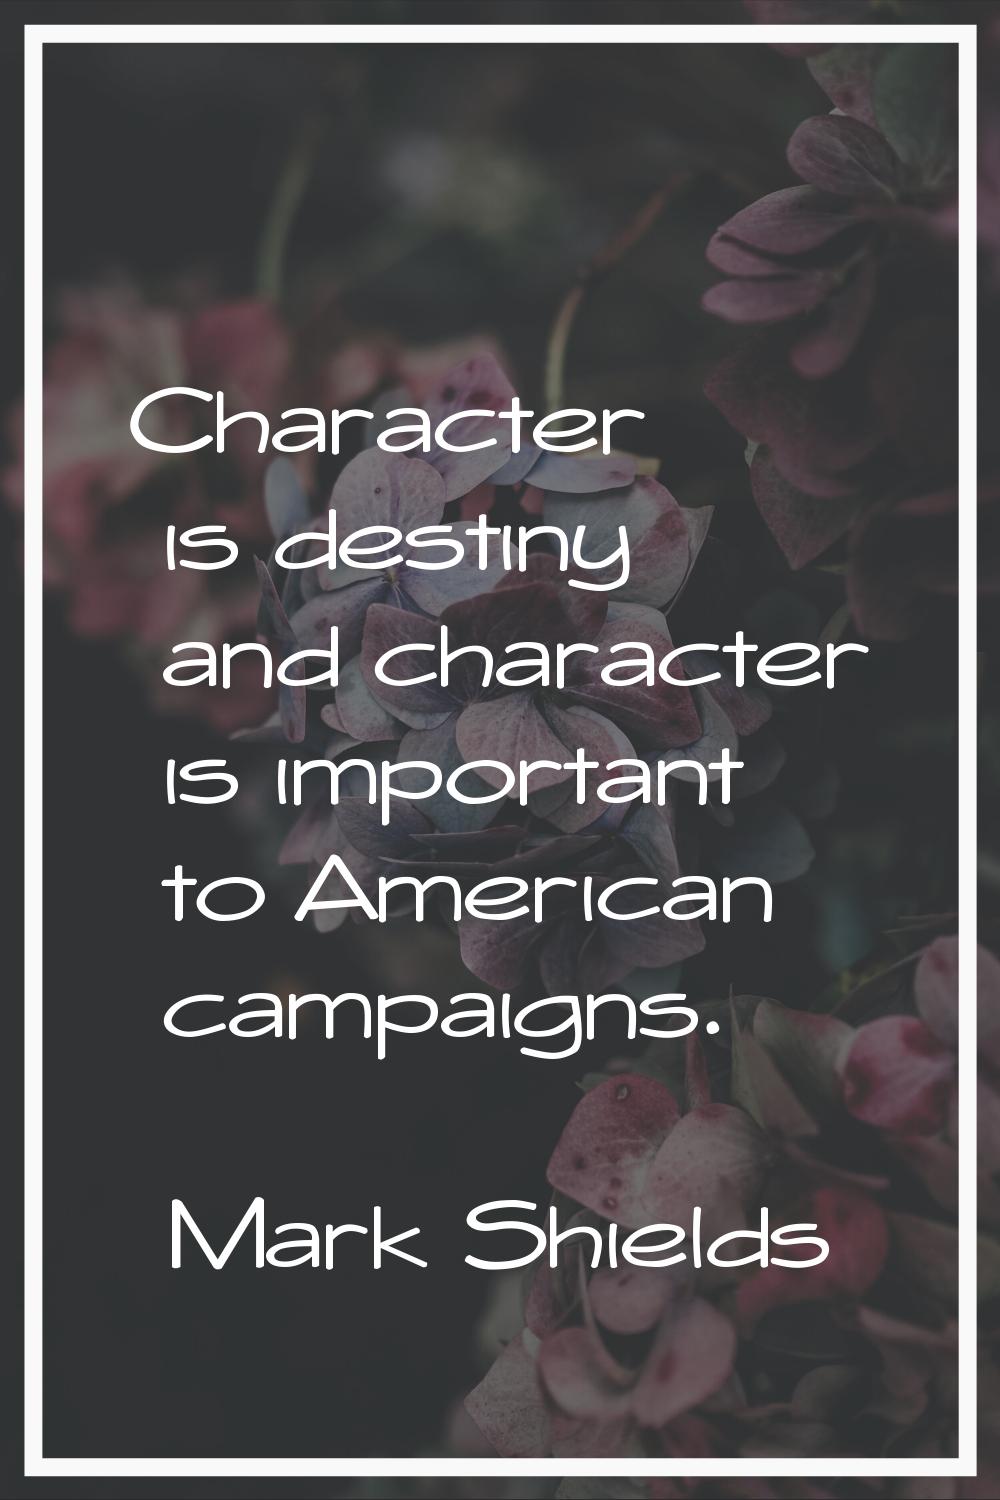 Character is destiny and character is important to American campaigns.